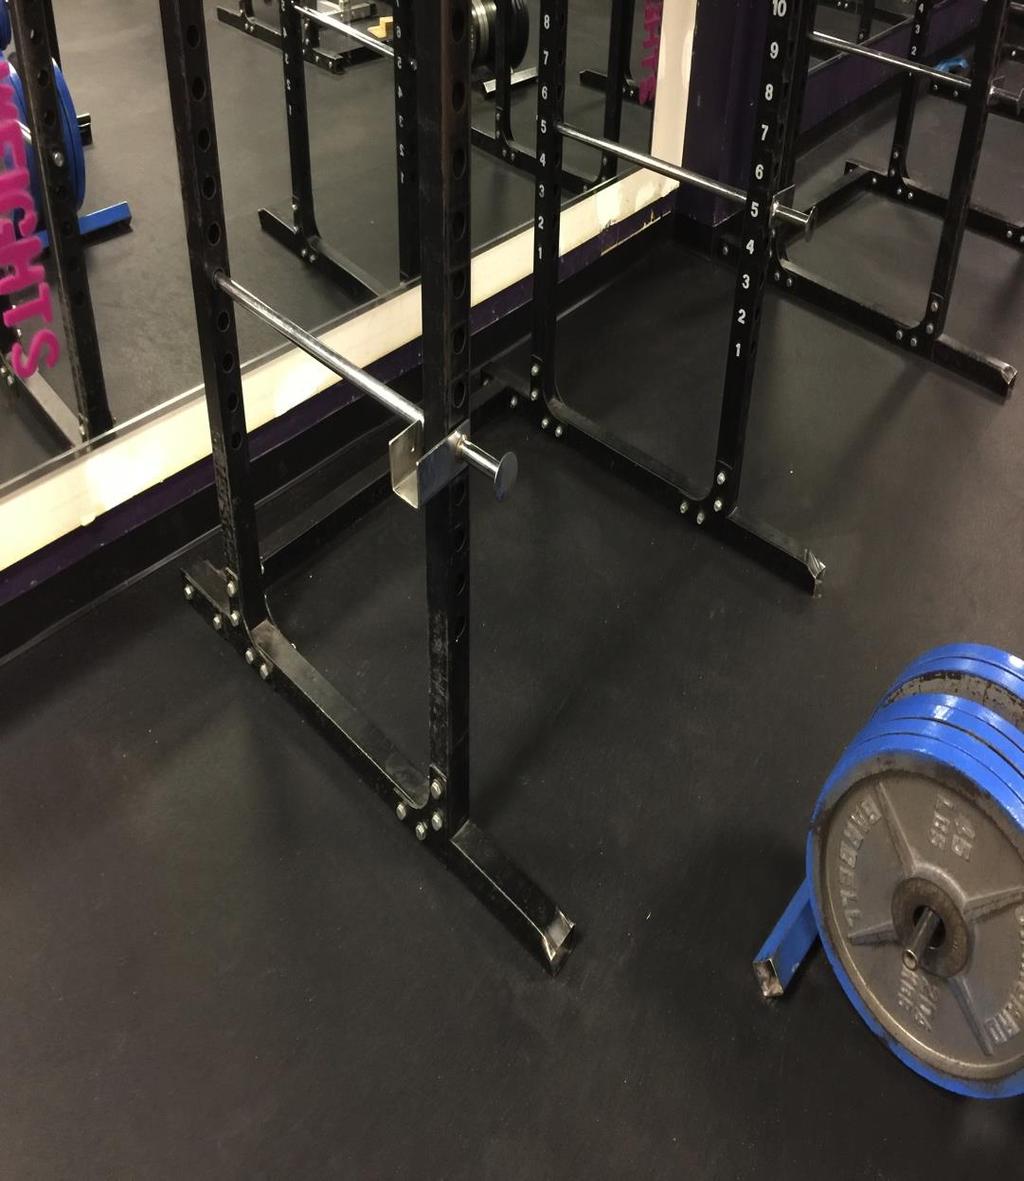 KCHS Weight Room Concerns Free Weights/Plate Loaded Equipment: There are racks that space bars on the floor or stood up in a corner very